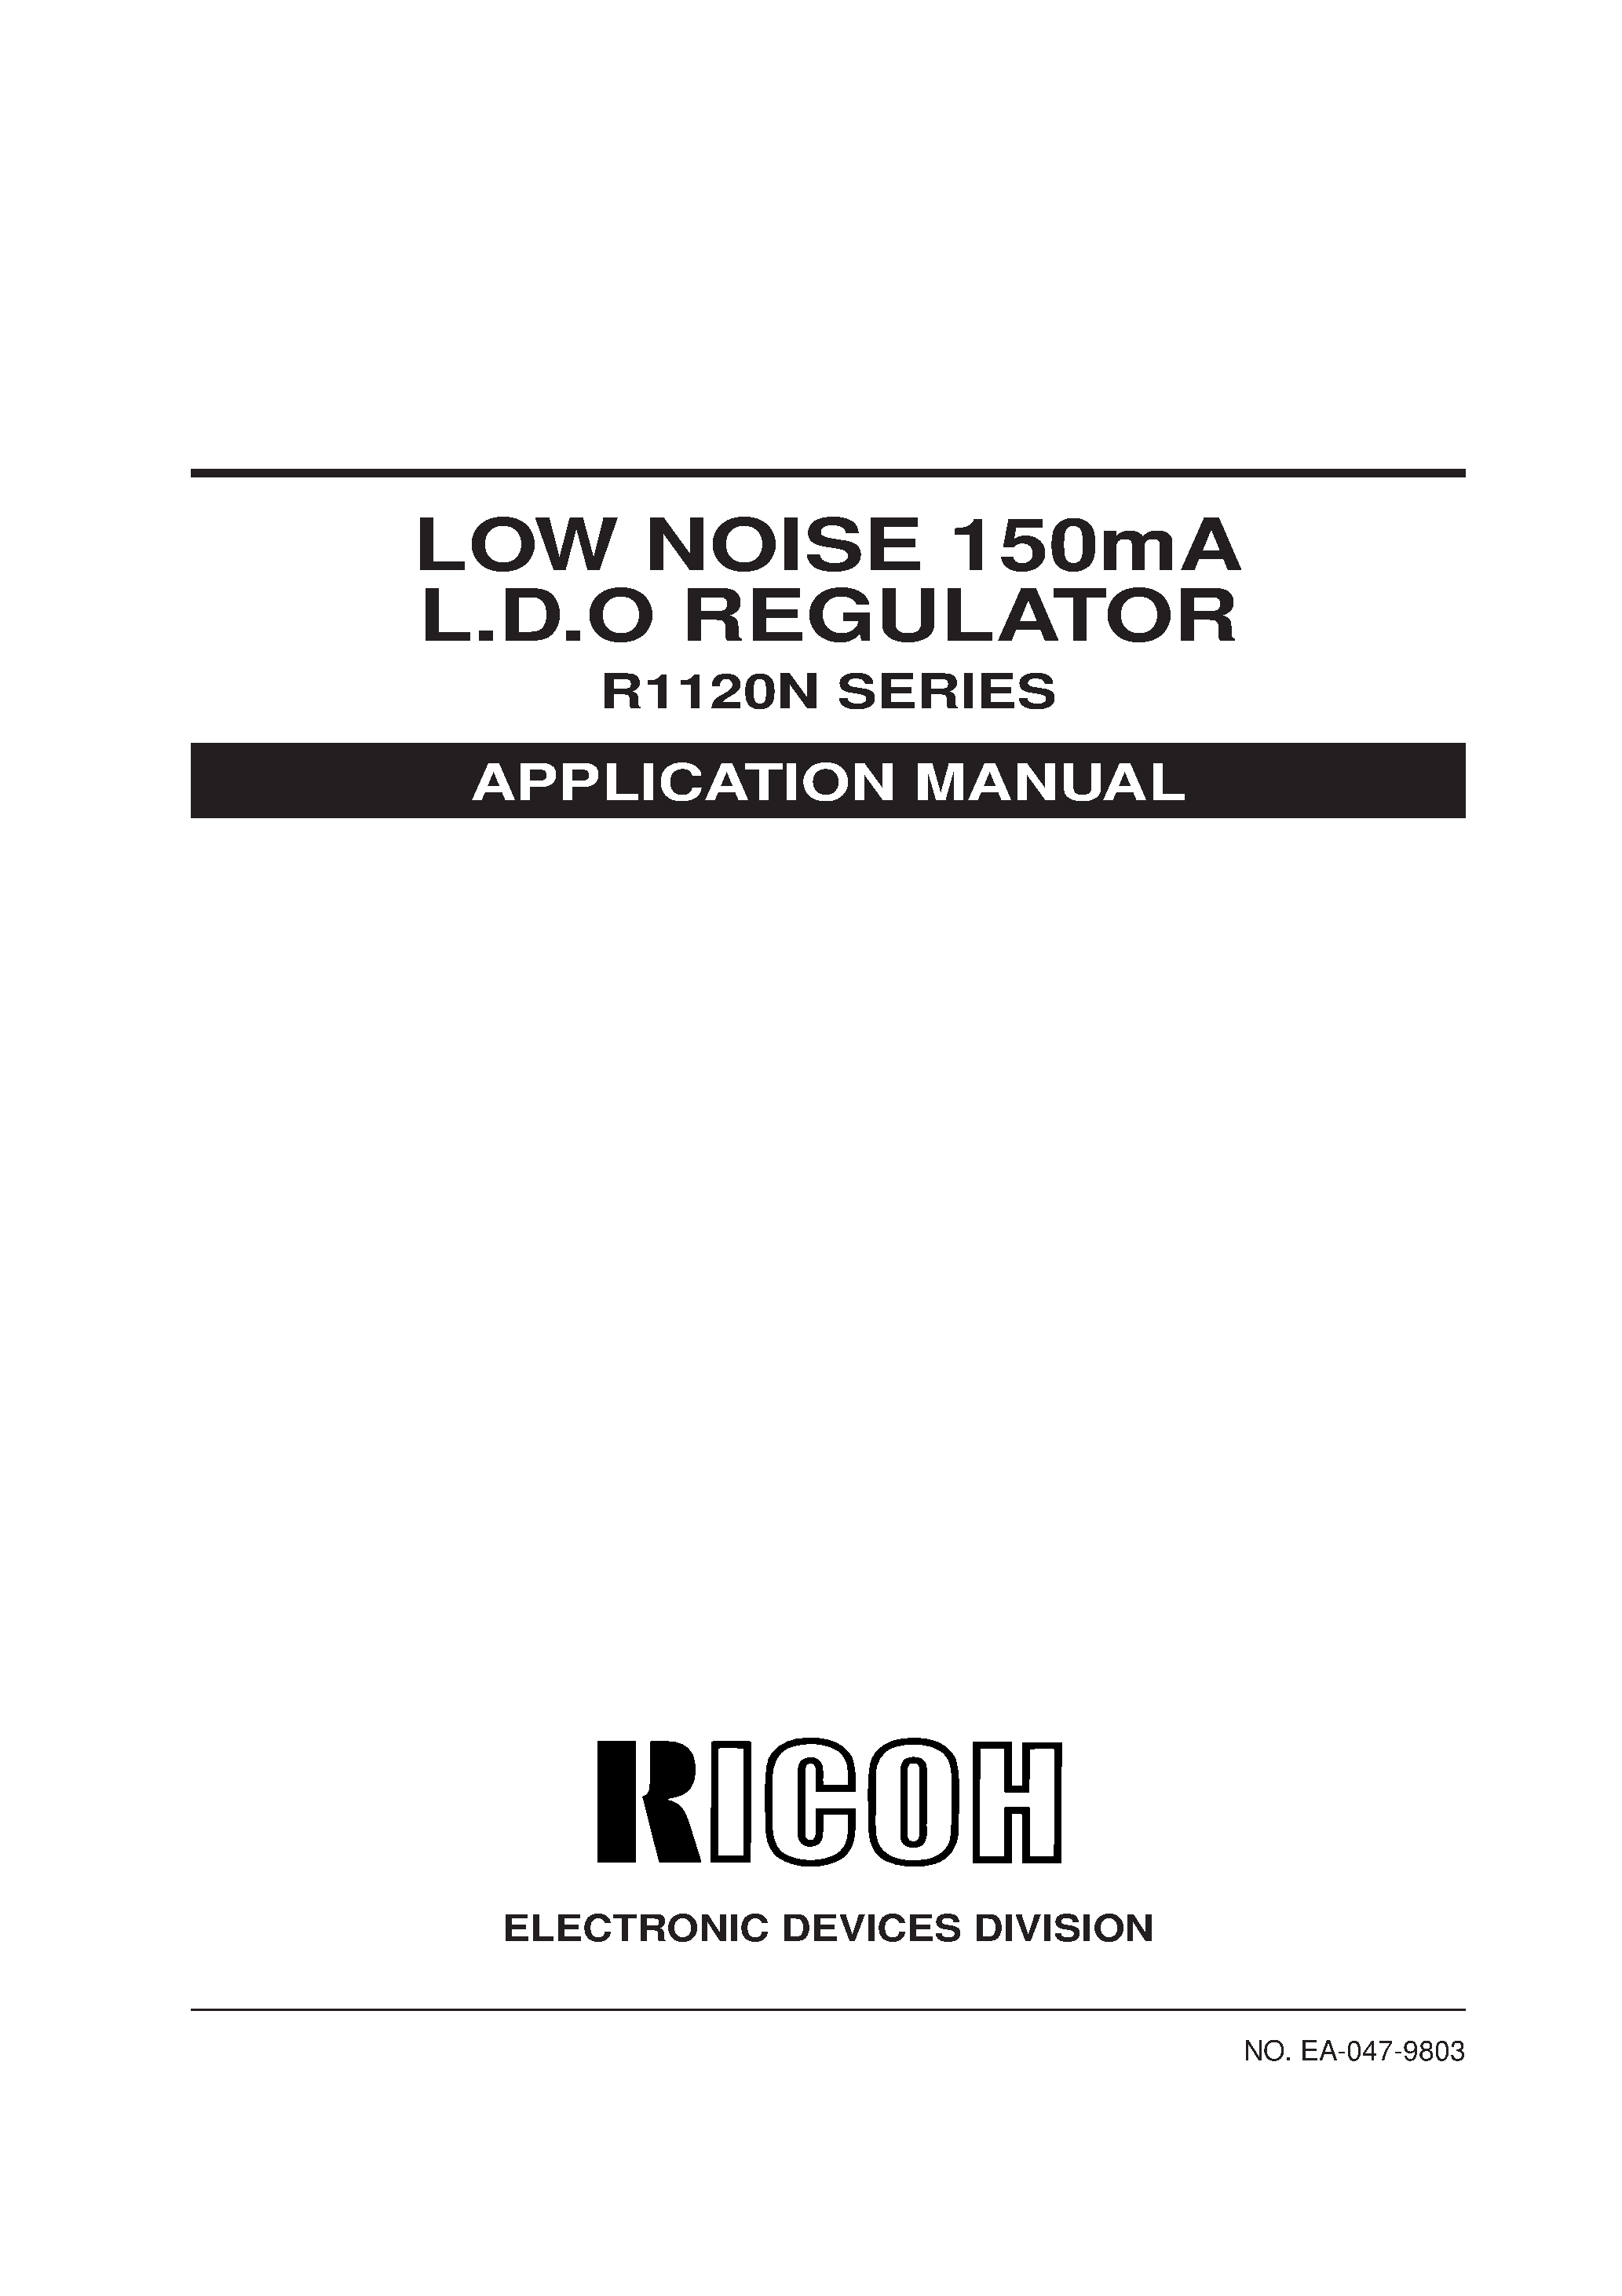 Datasheet R1120N401A-TR - LOW NOISE 150mA L.D.O REGULATOR page 1